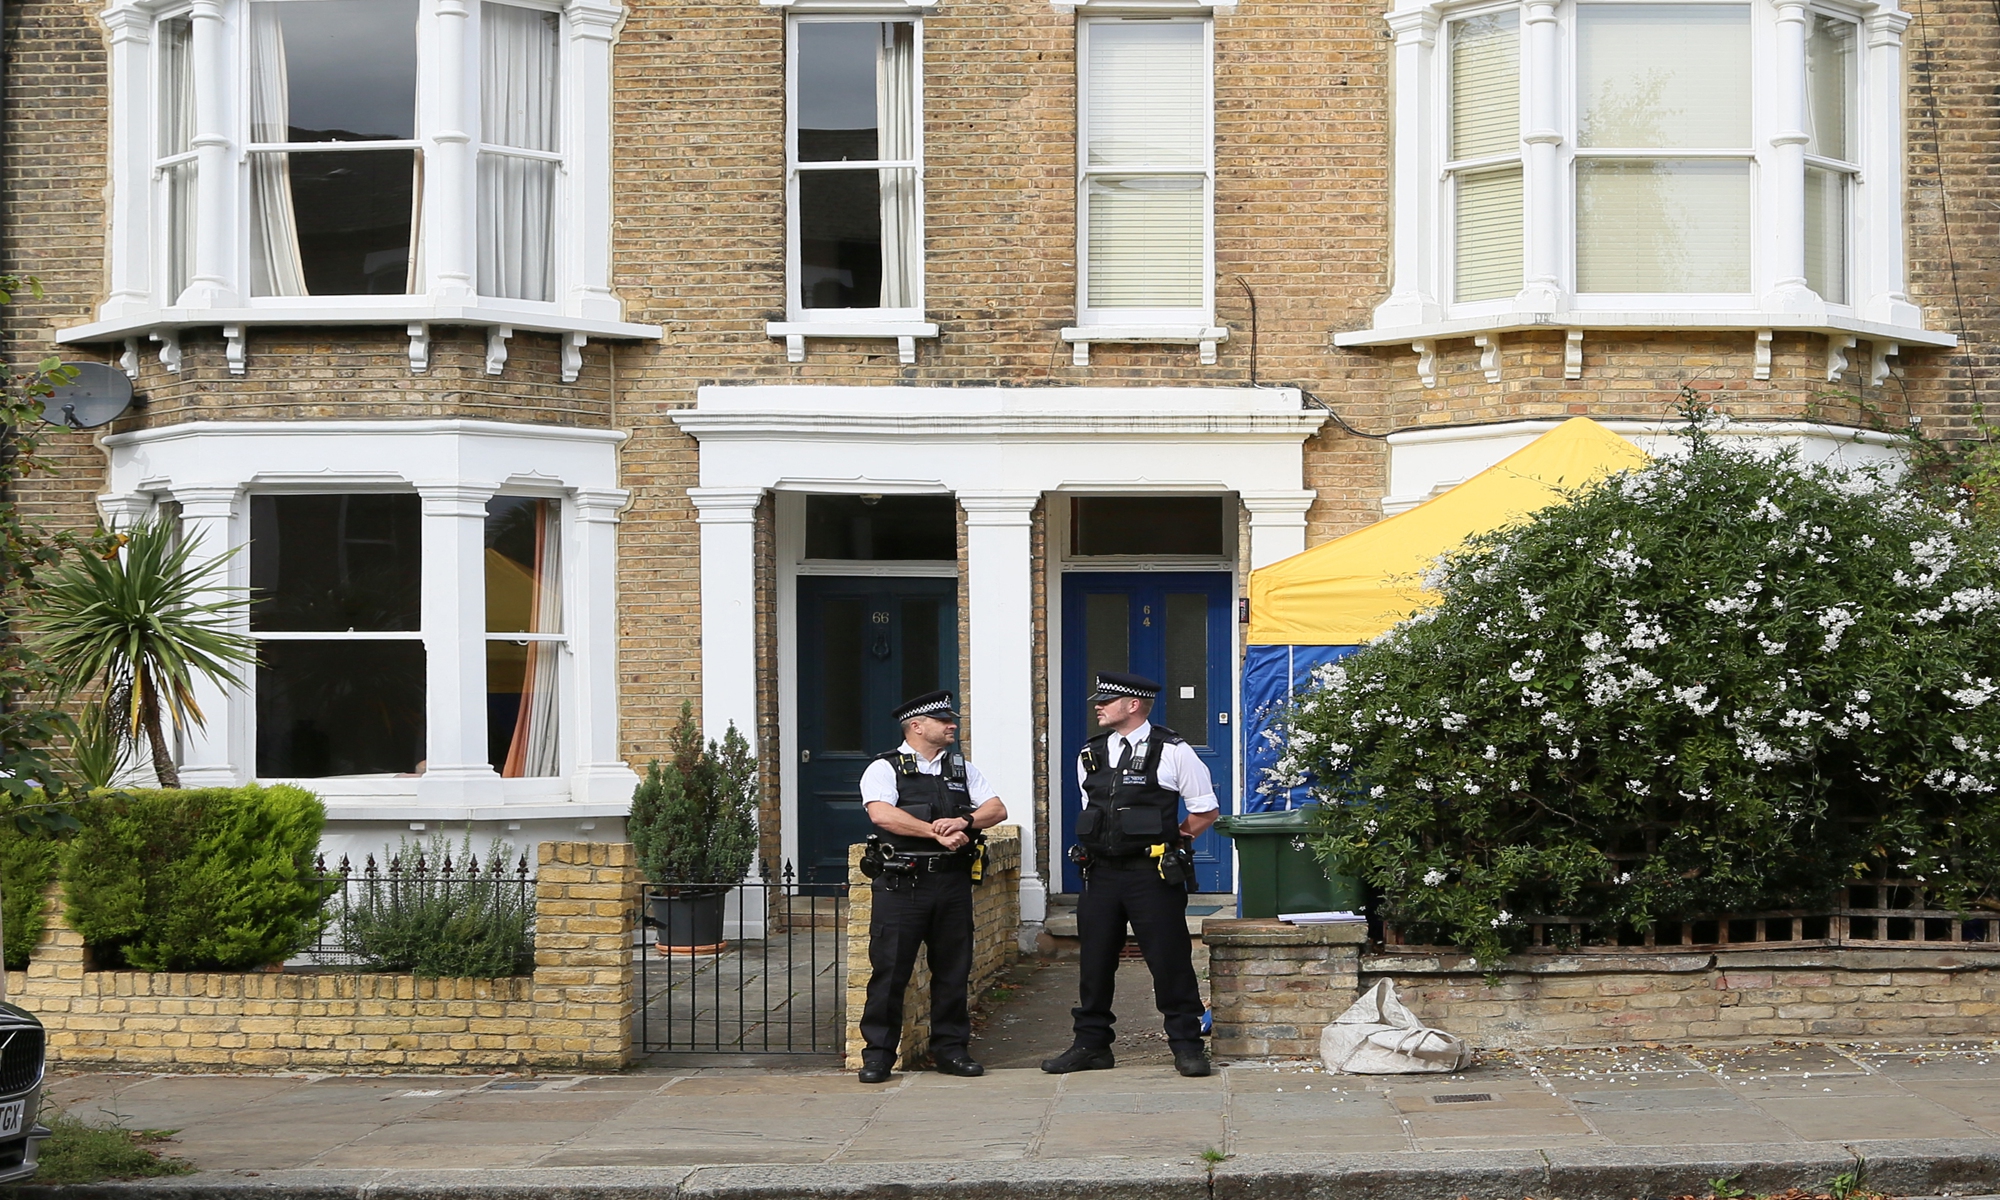 Anti-terror police search a property allegedly linked with the man suspected of murdering Sir David Amess in London, the UK on Sunday. Amess died Friday after he was stabbed multiple times while meeting constituents in Essex. He had been an MP since 1983 for Basildon and Southend West constituencies. Photo: AFP